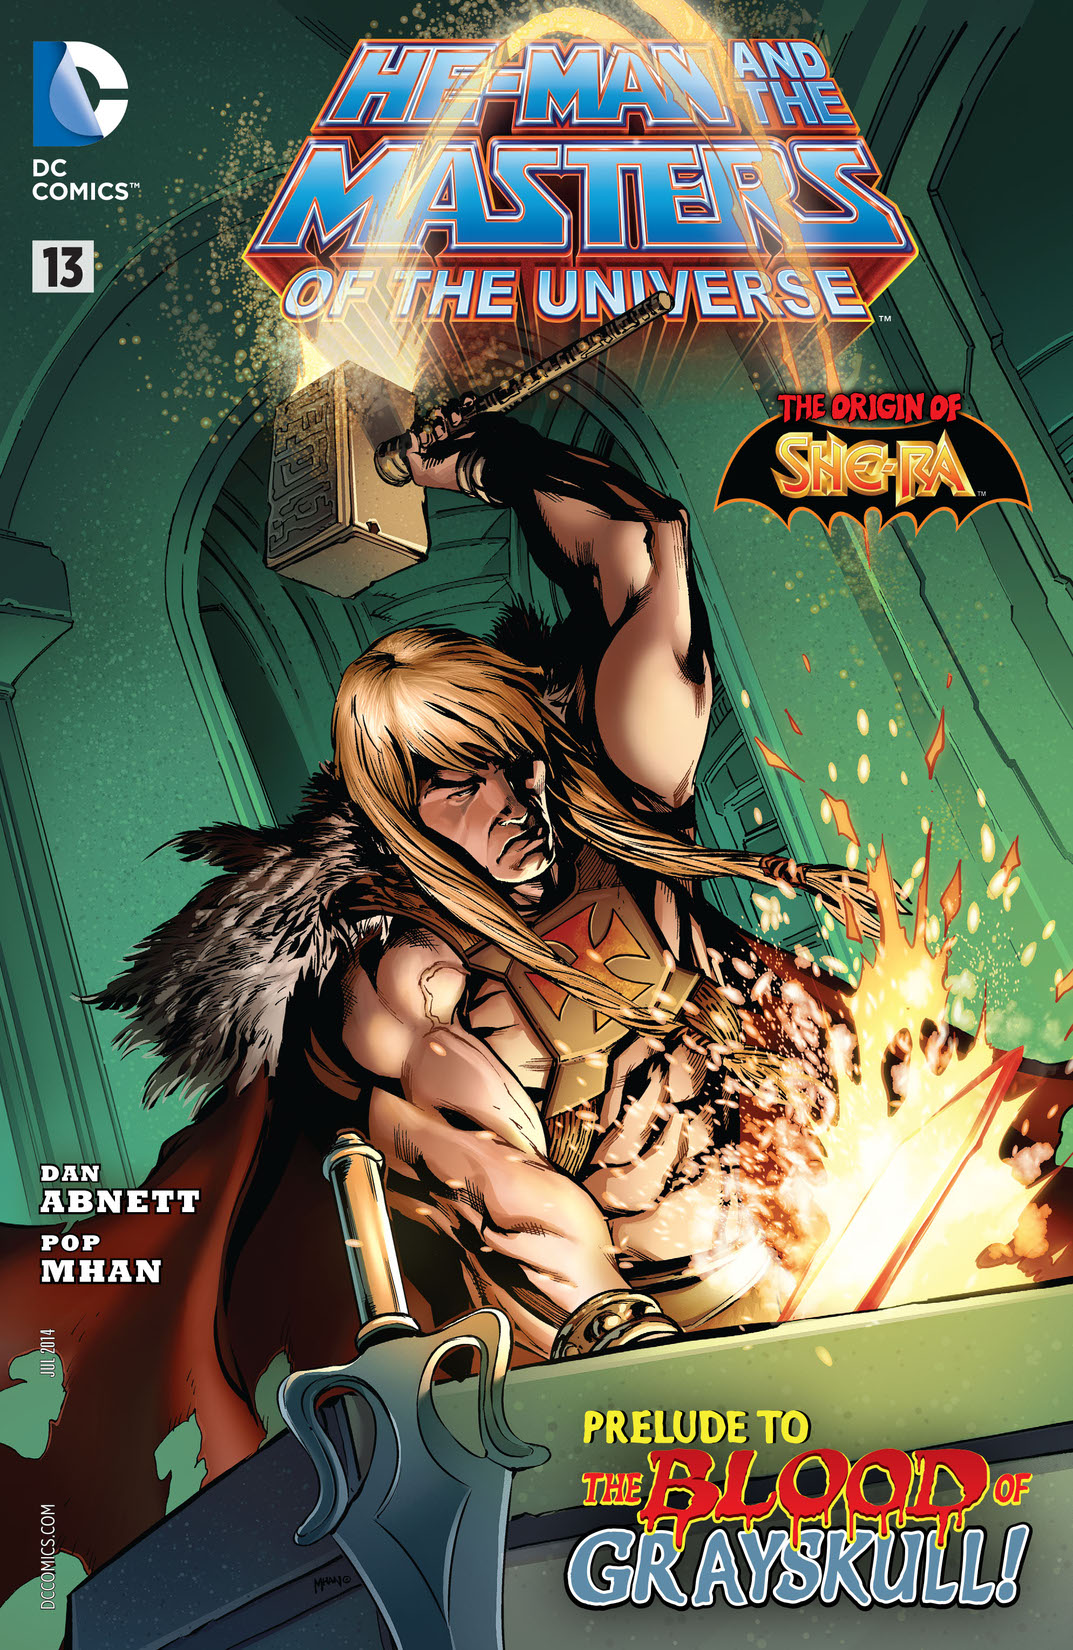 He-Man and the Masters of the Universe (2013-) #13 preview images